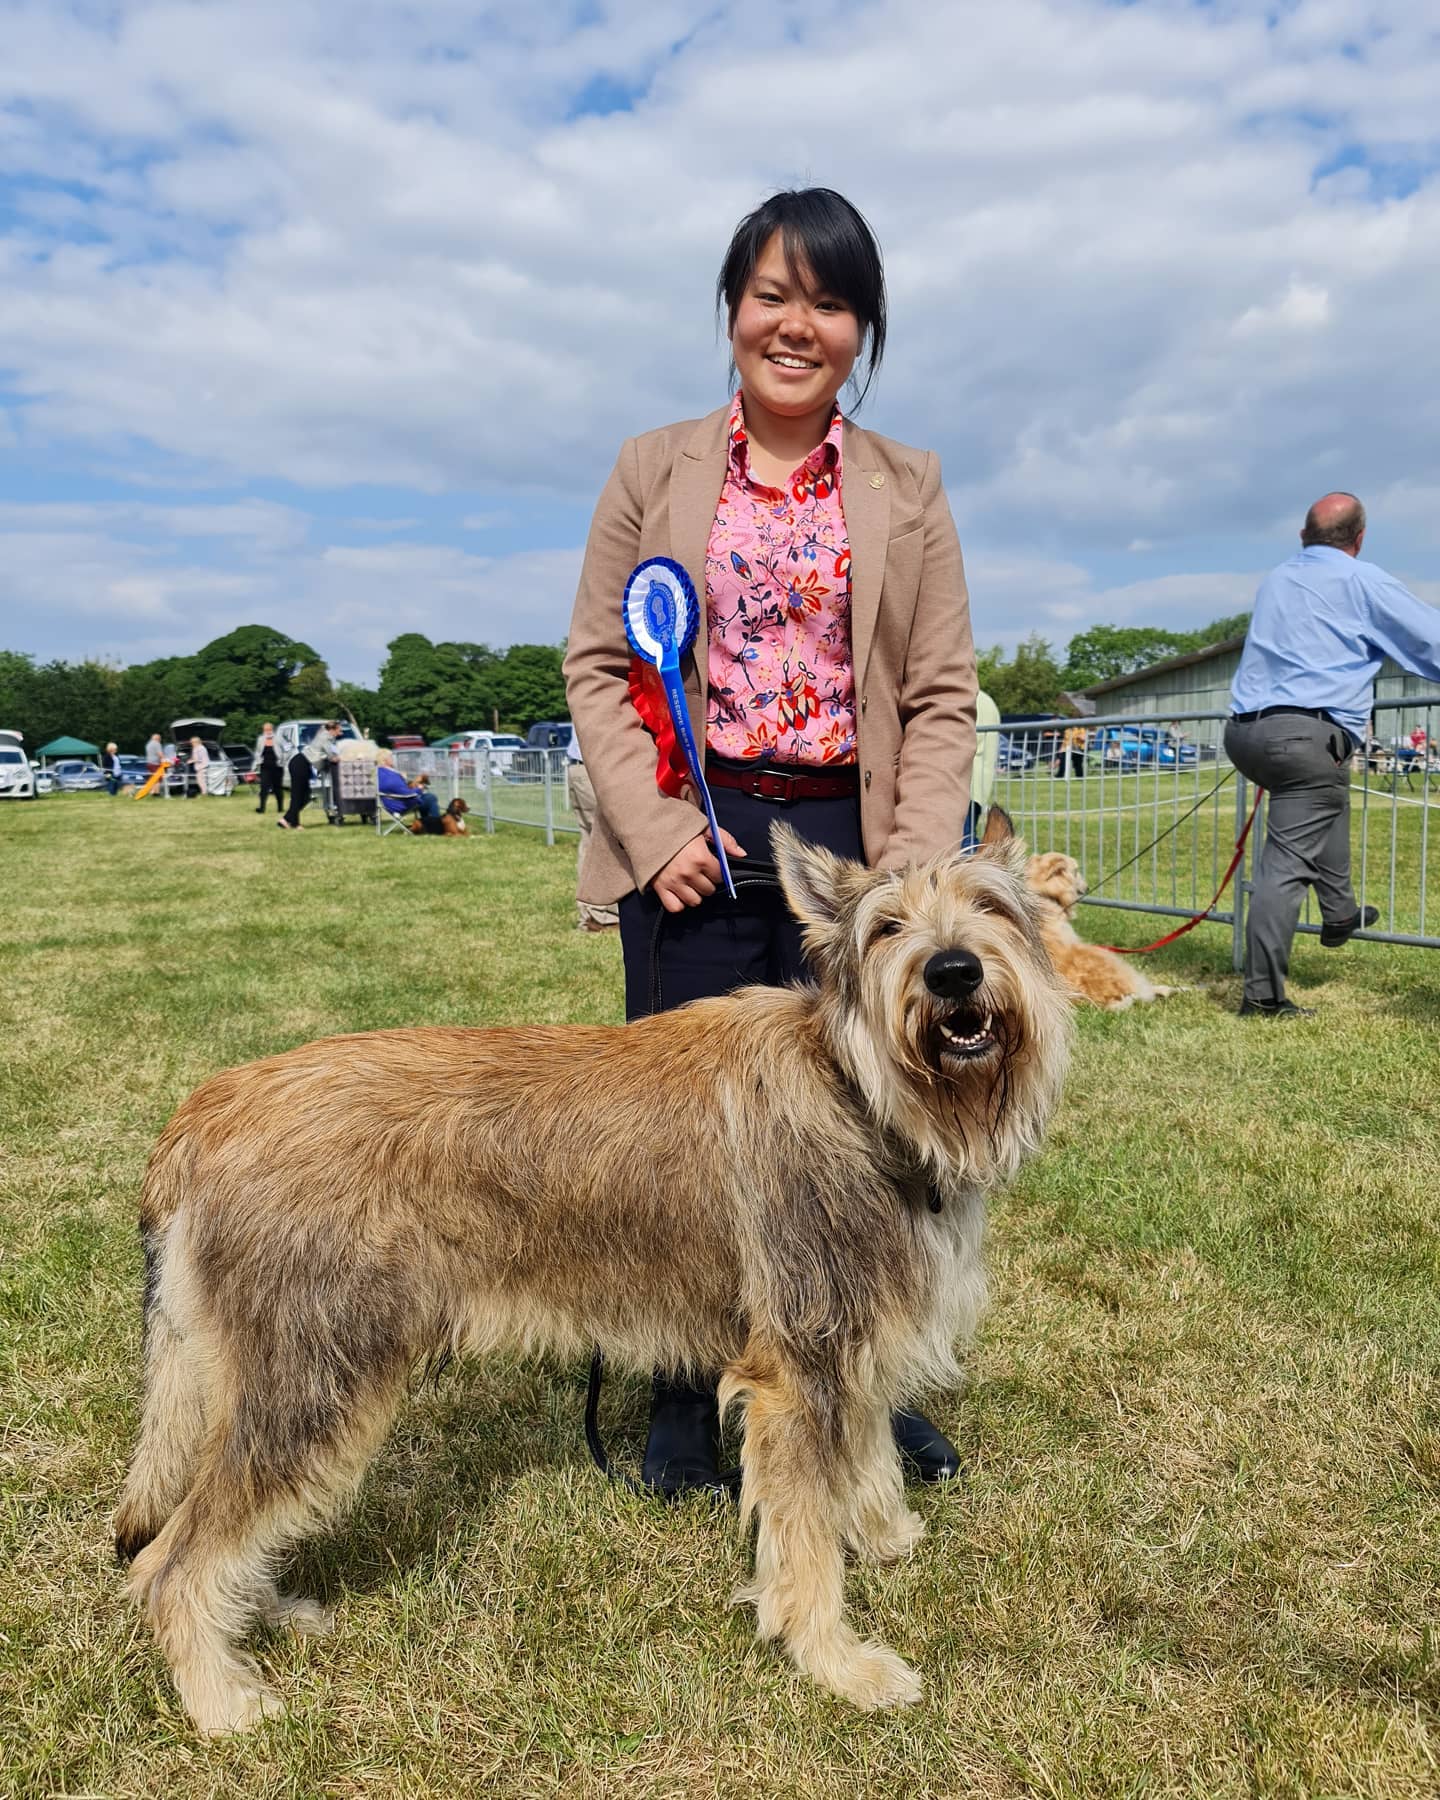 Picardy Sheepdog / Berger Picard at Royal Cheshire Premier Open Show